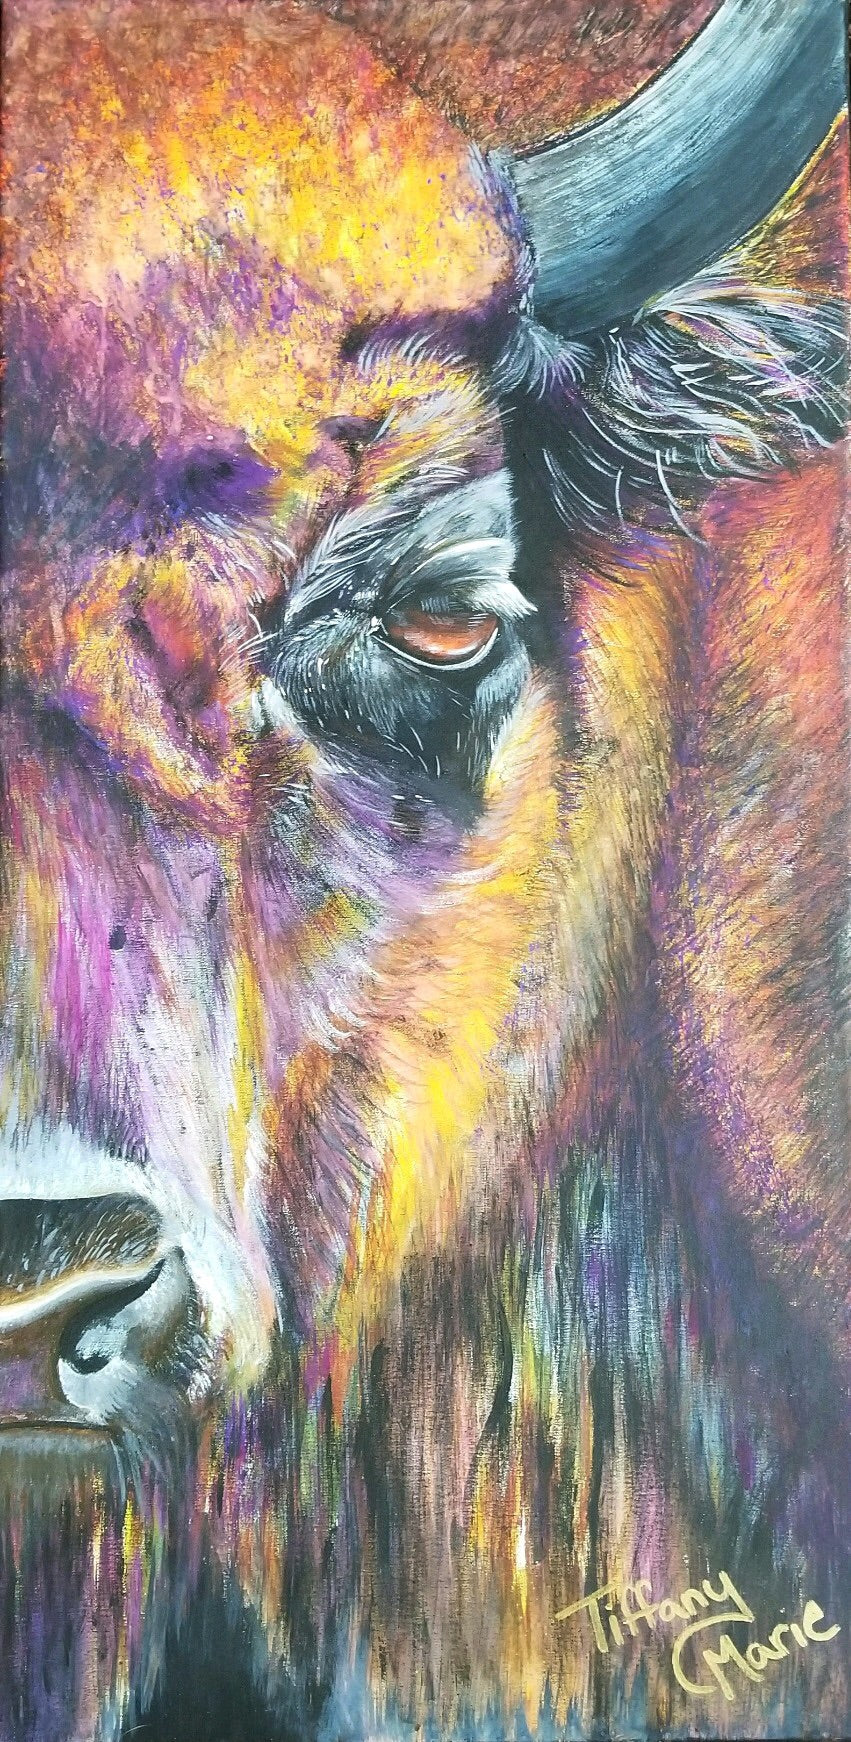 Iridescent Buffalo - Limited Edition Prints (only 2 left!) - Tiffany Marie Art